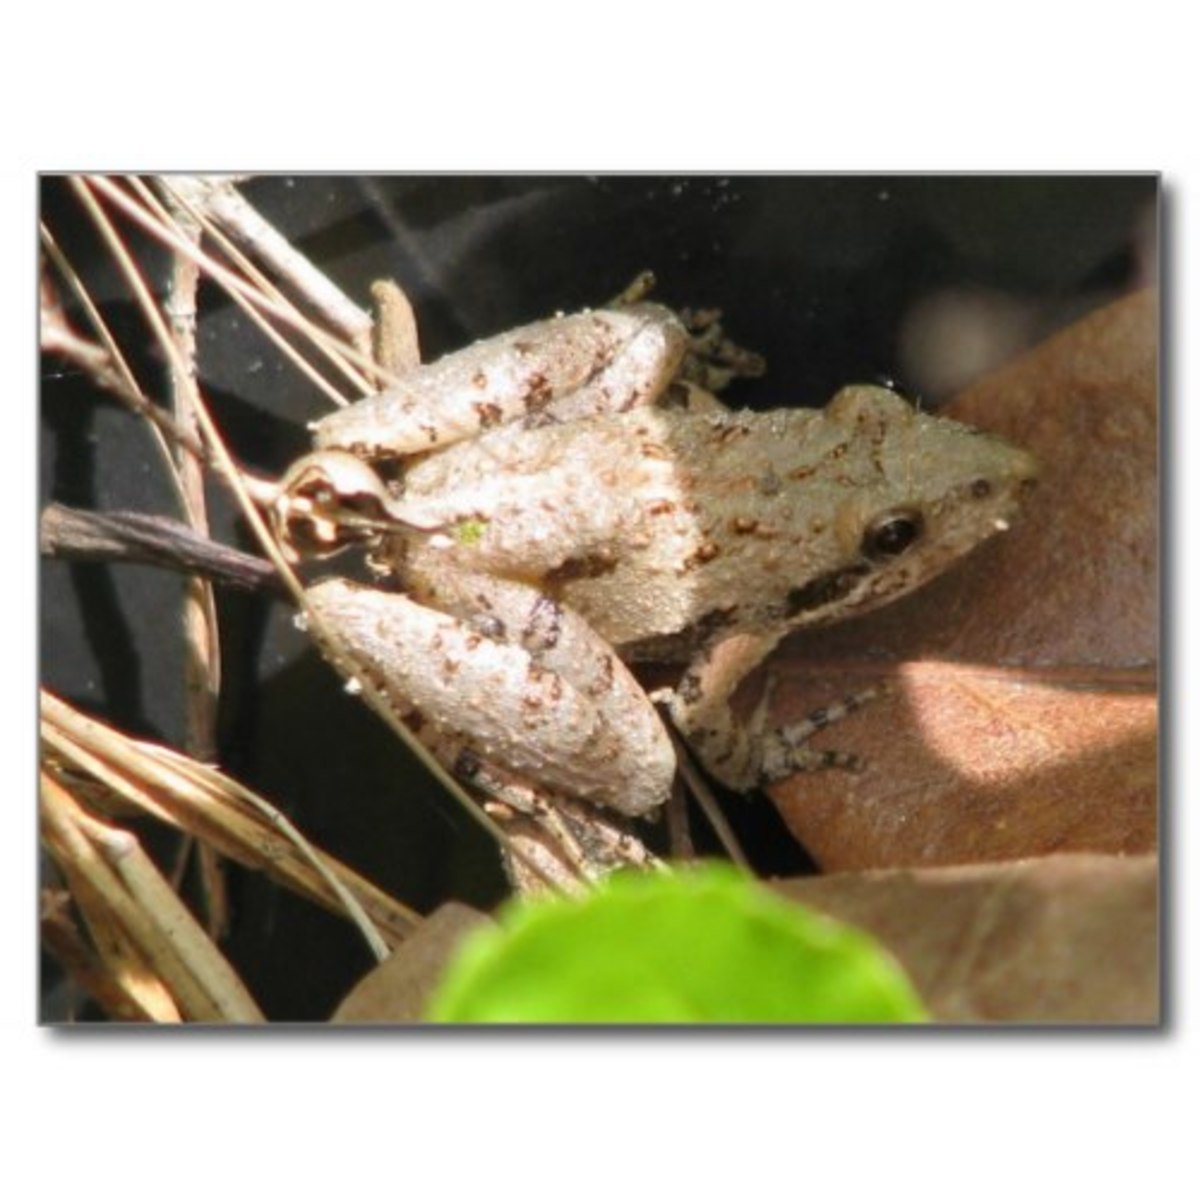 This light colored cricket frog shows the variety of color and patterns which can occur.